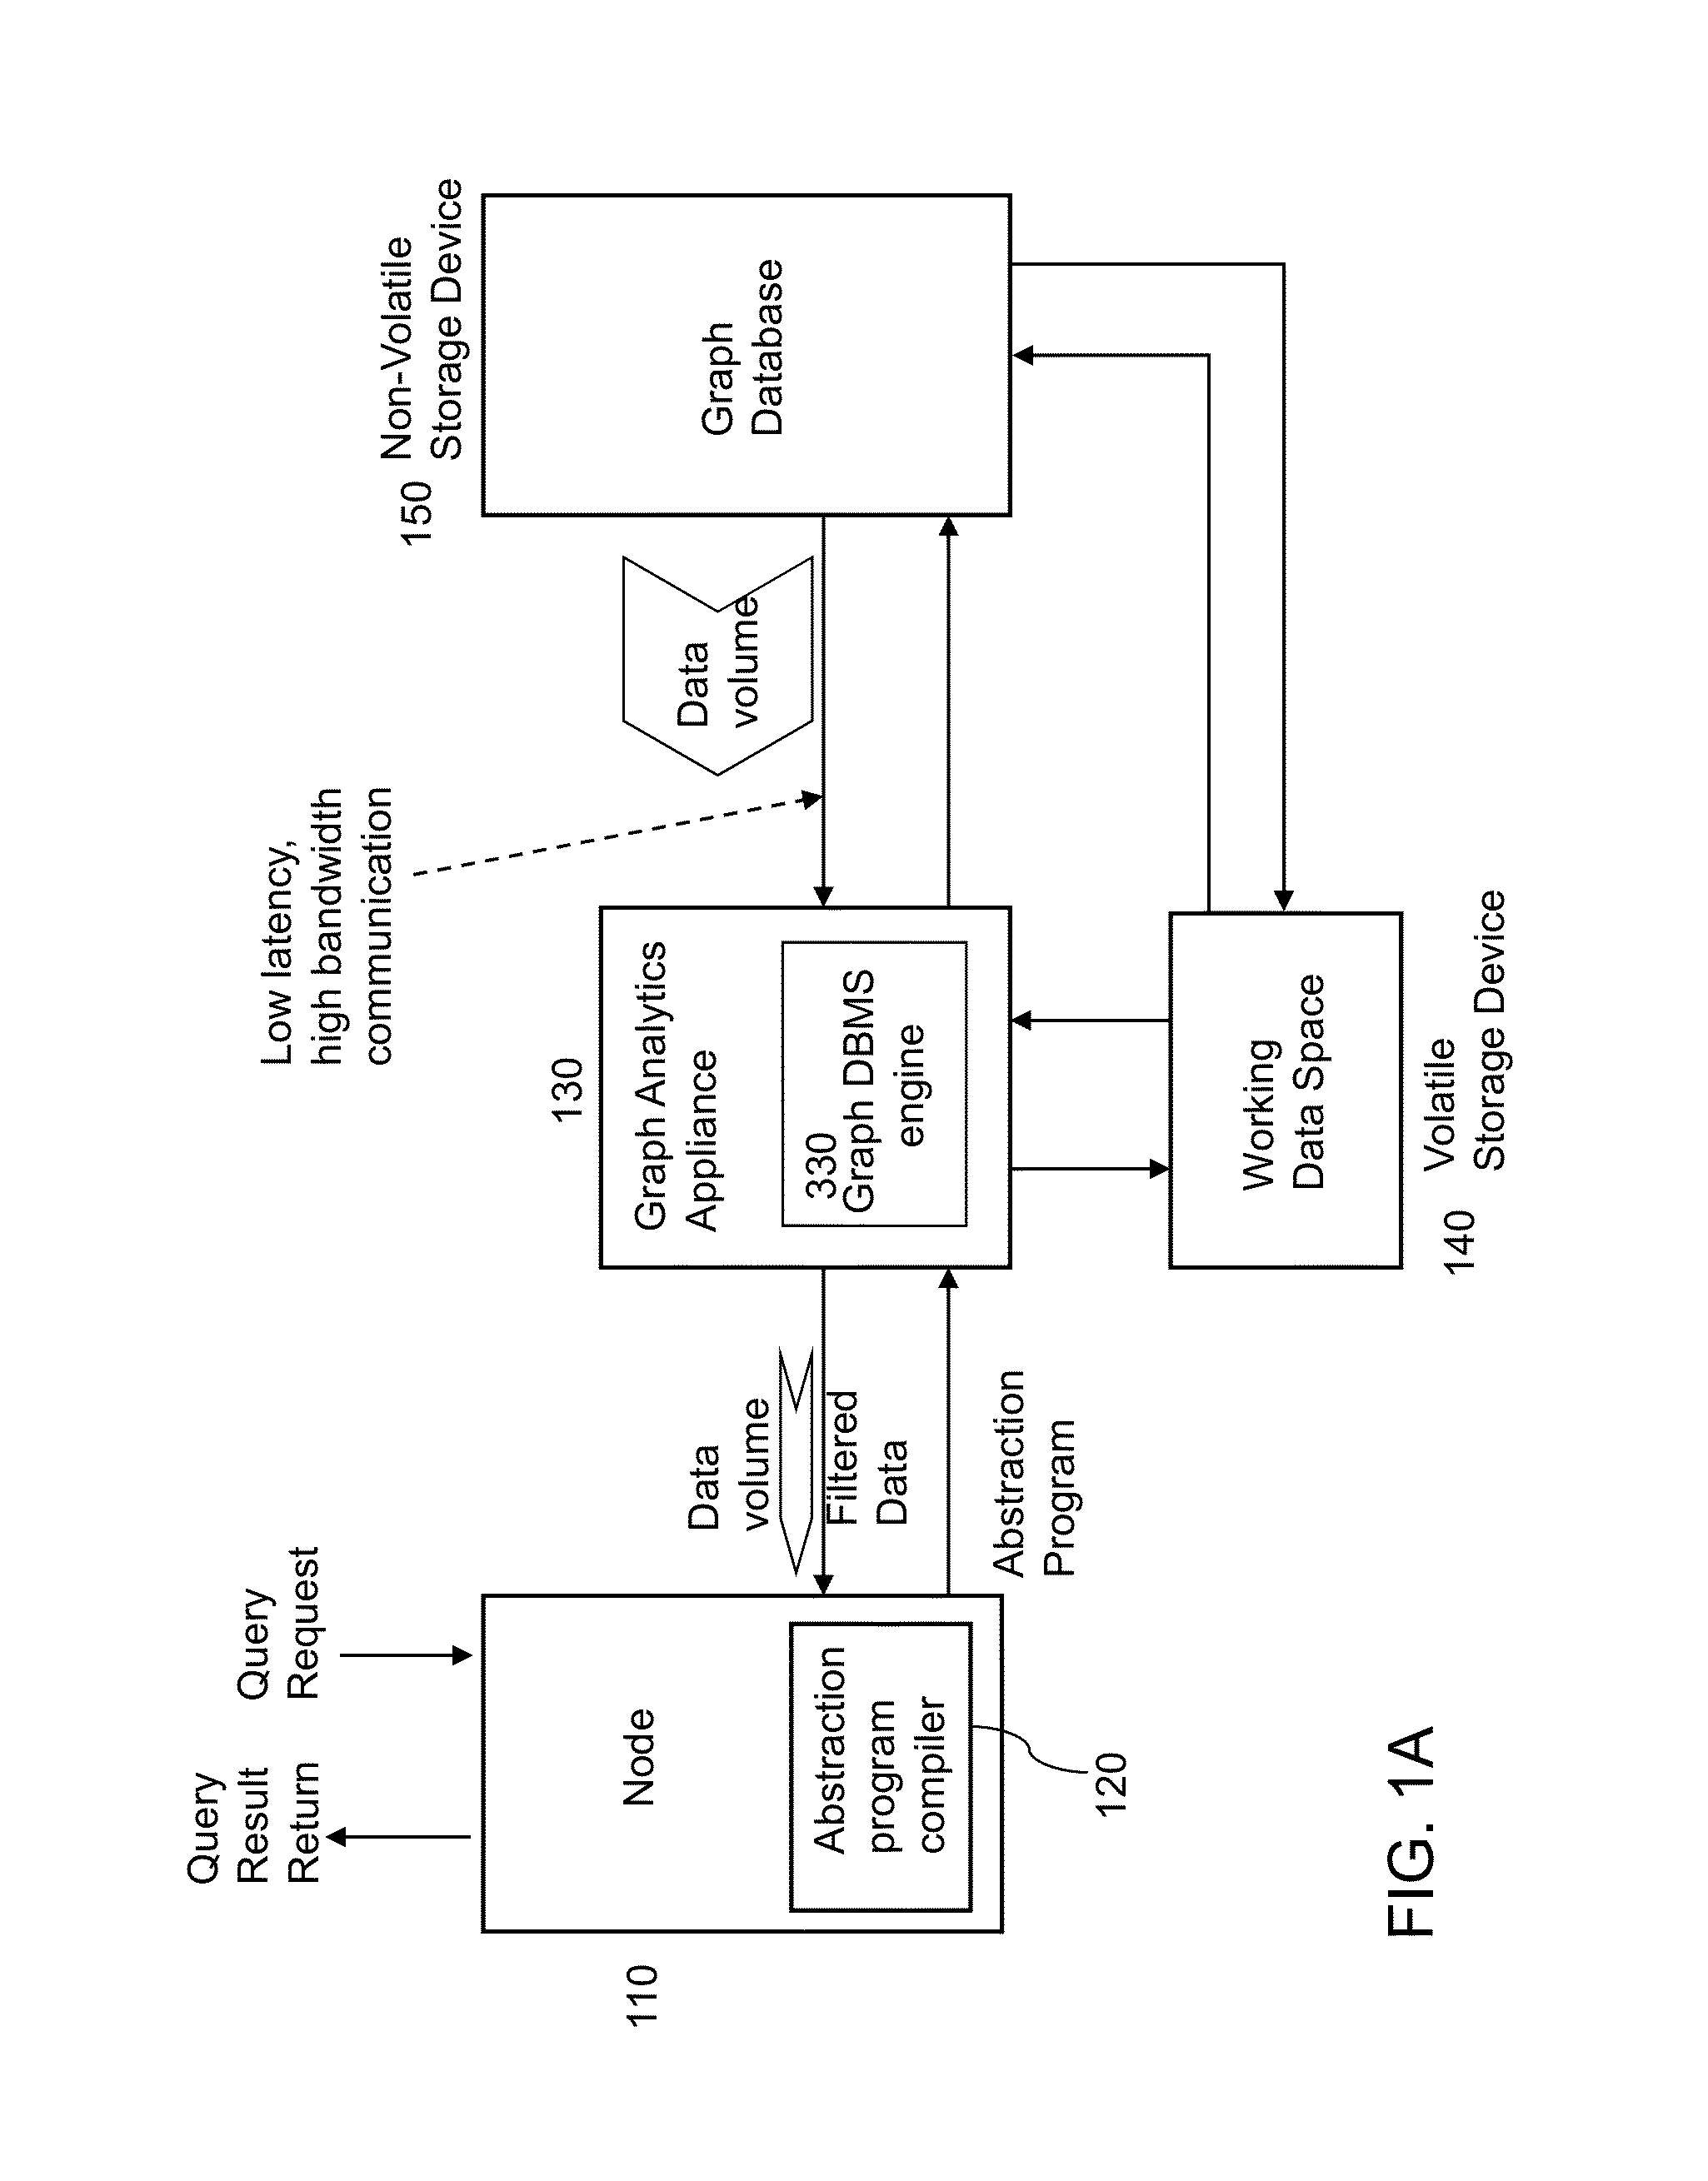 Method and apparatus for efficient execution of concurrent processes on a multithreaded message passing system